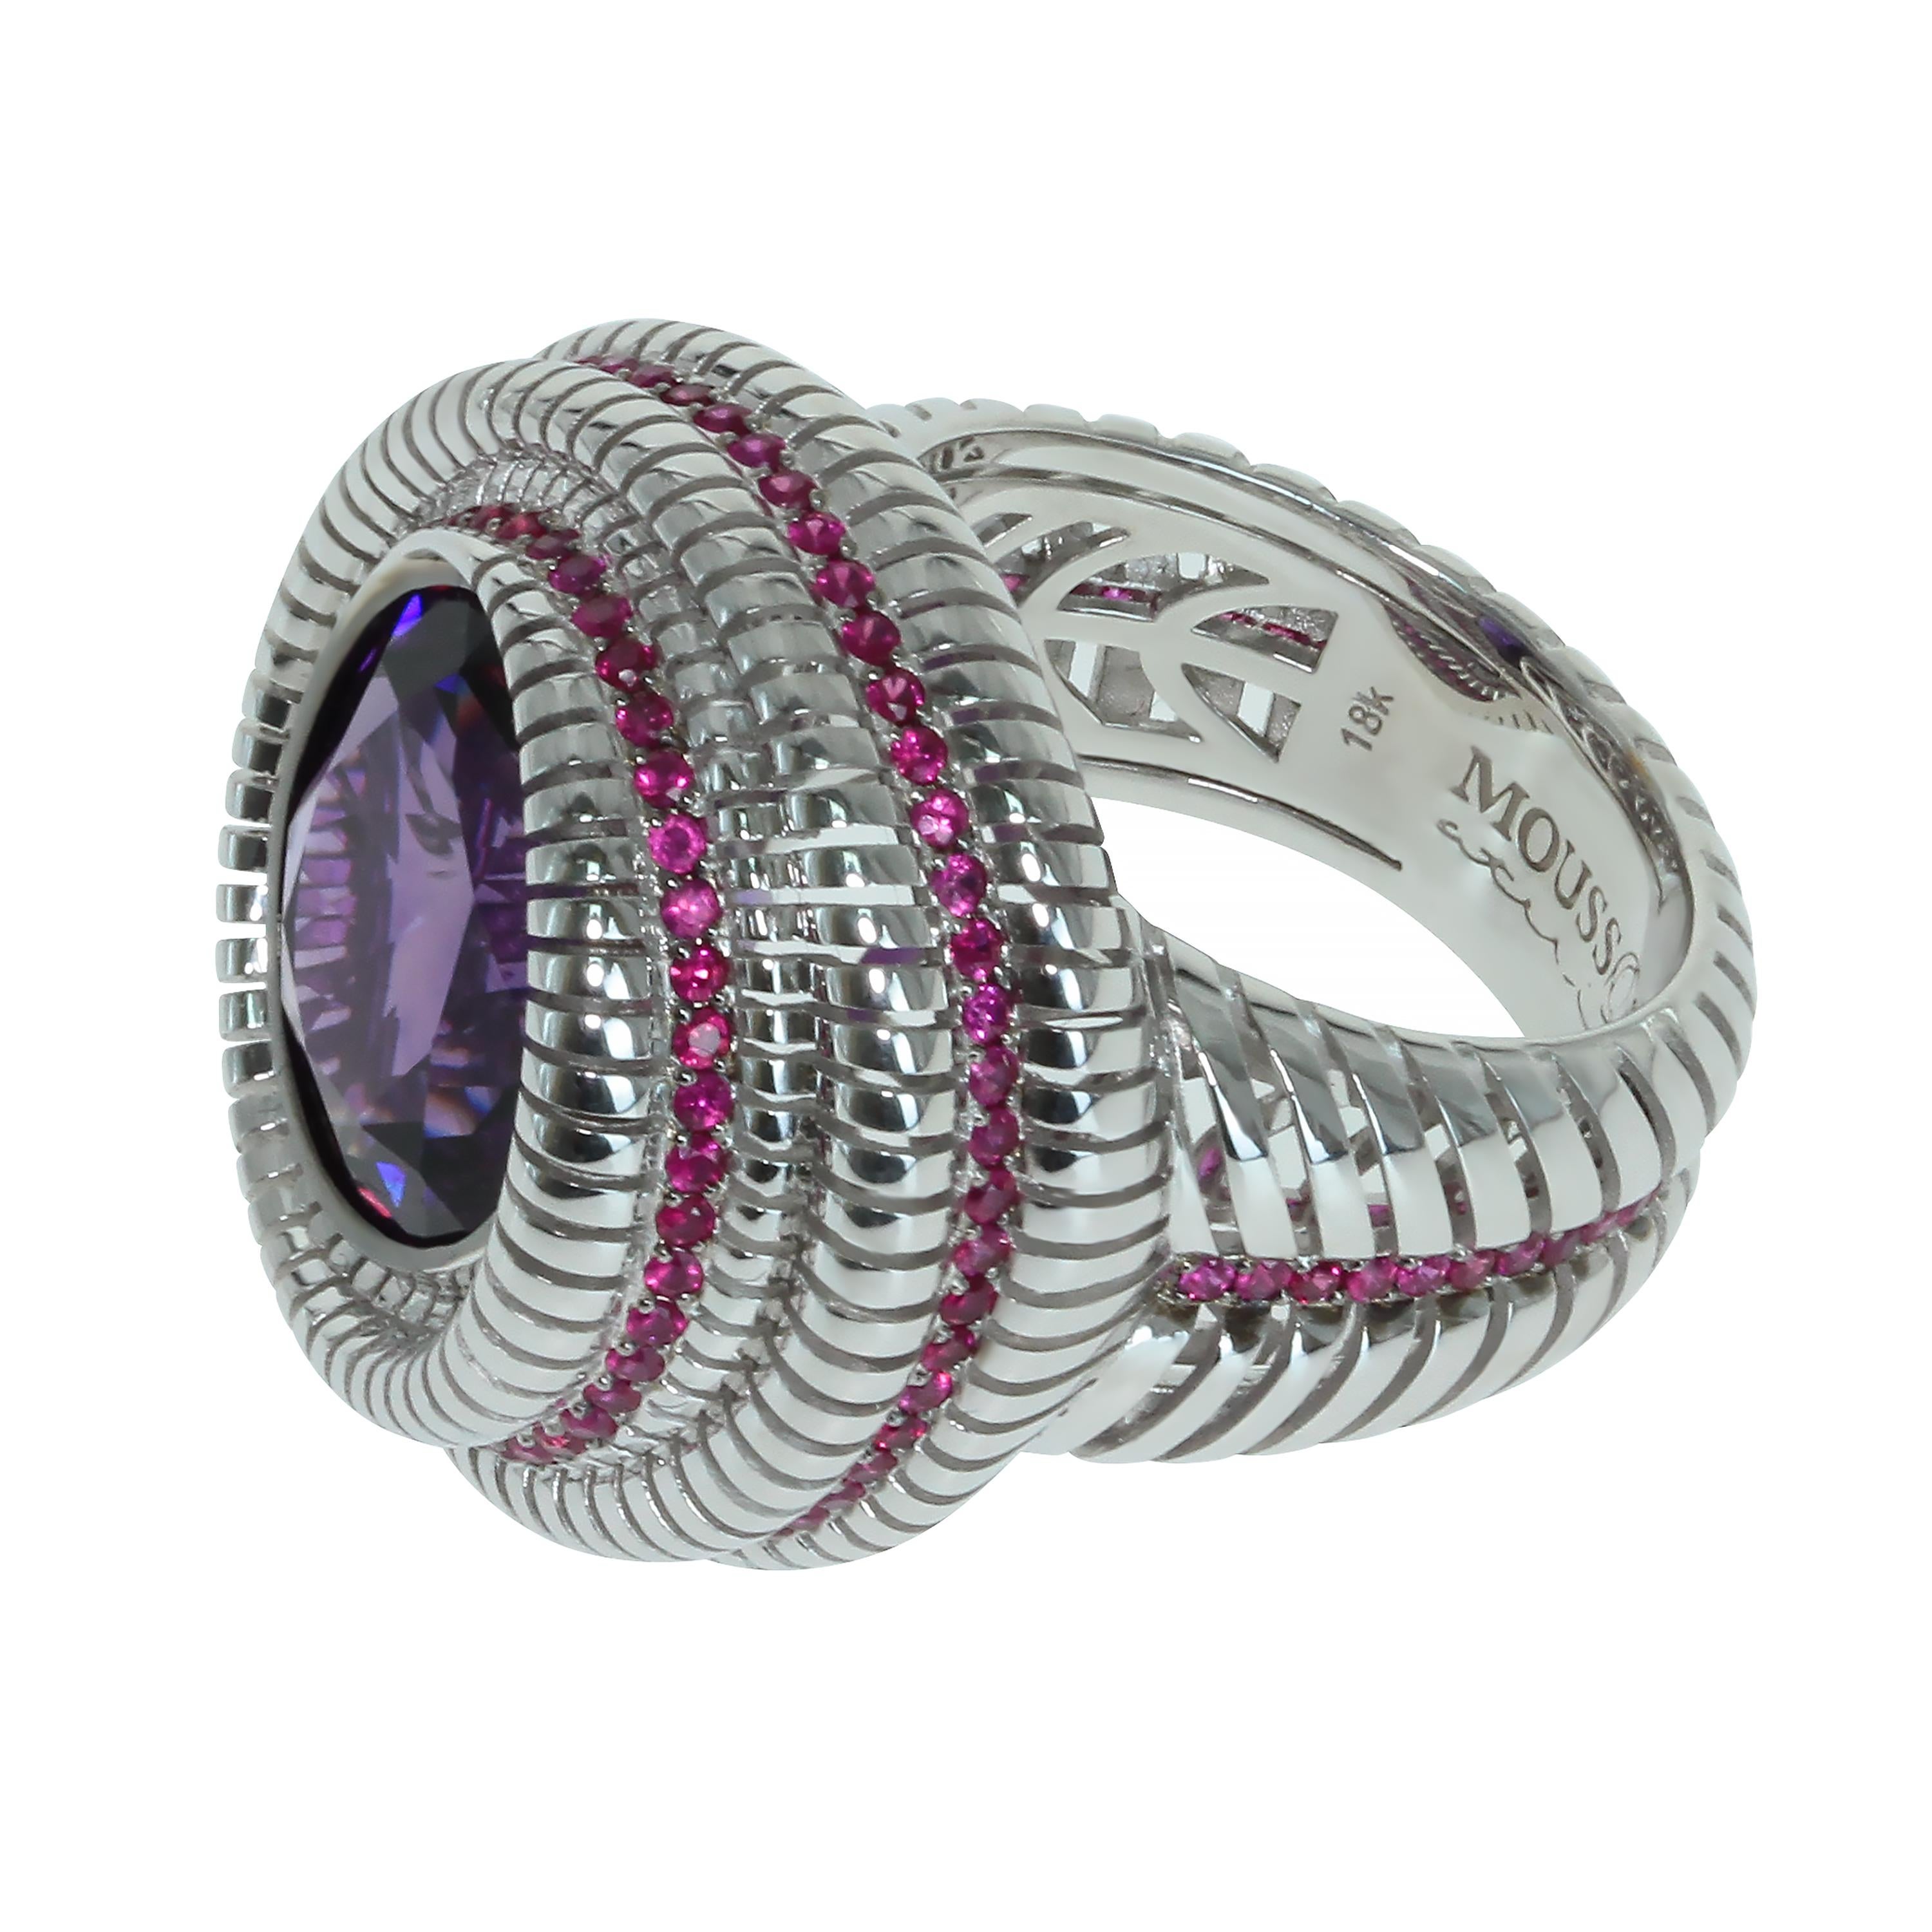 Amethyst Ruby 18 Karat White Gold Ring

Unusual form of 18k White Gold binds as a chain this astounding round shaped 8.08 carat amethyst. And line of 151 glittering Rubies perfectly combines with this duet. This is the kind of ring one wears to make